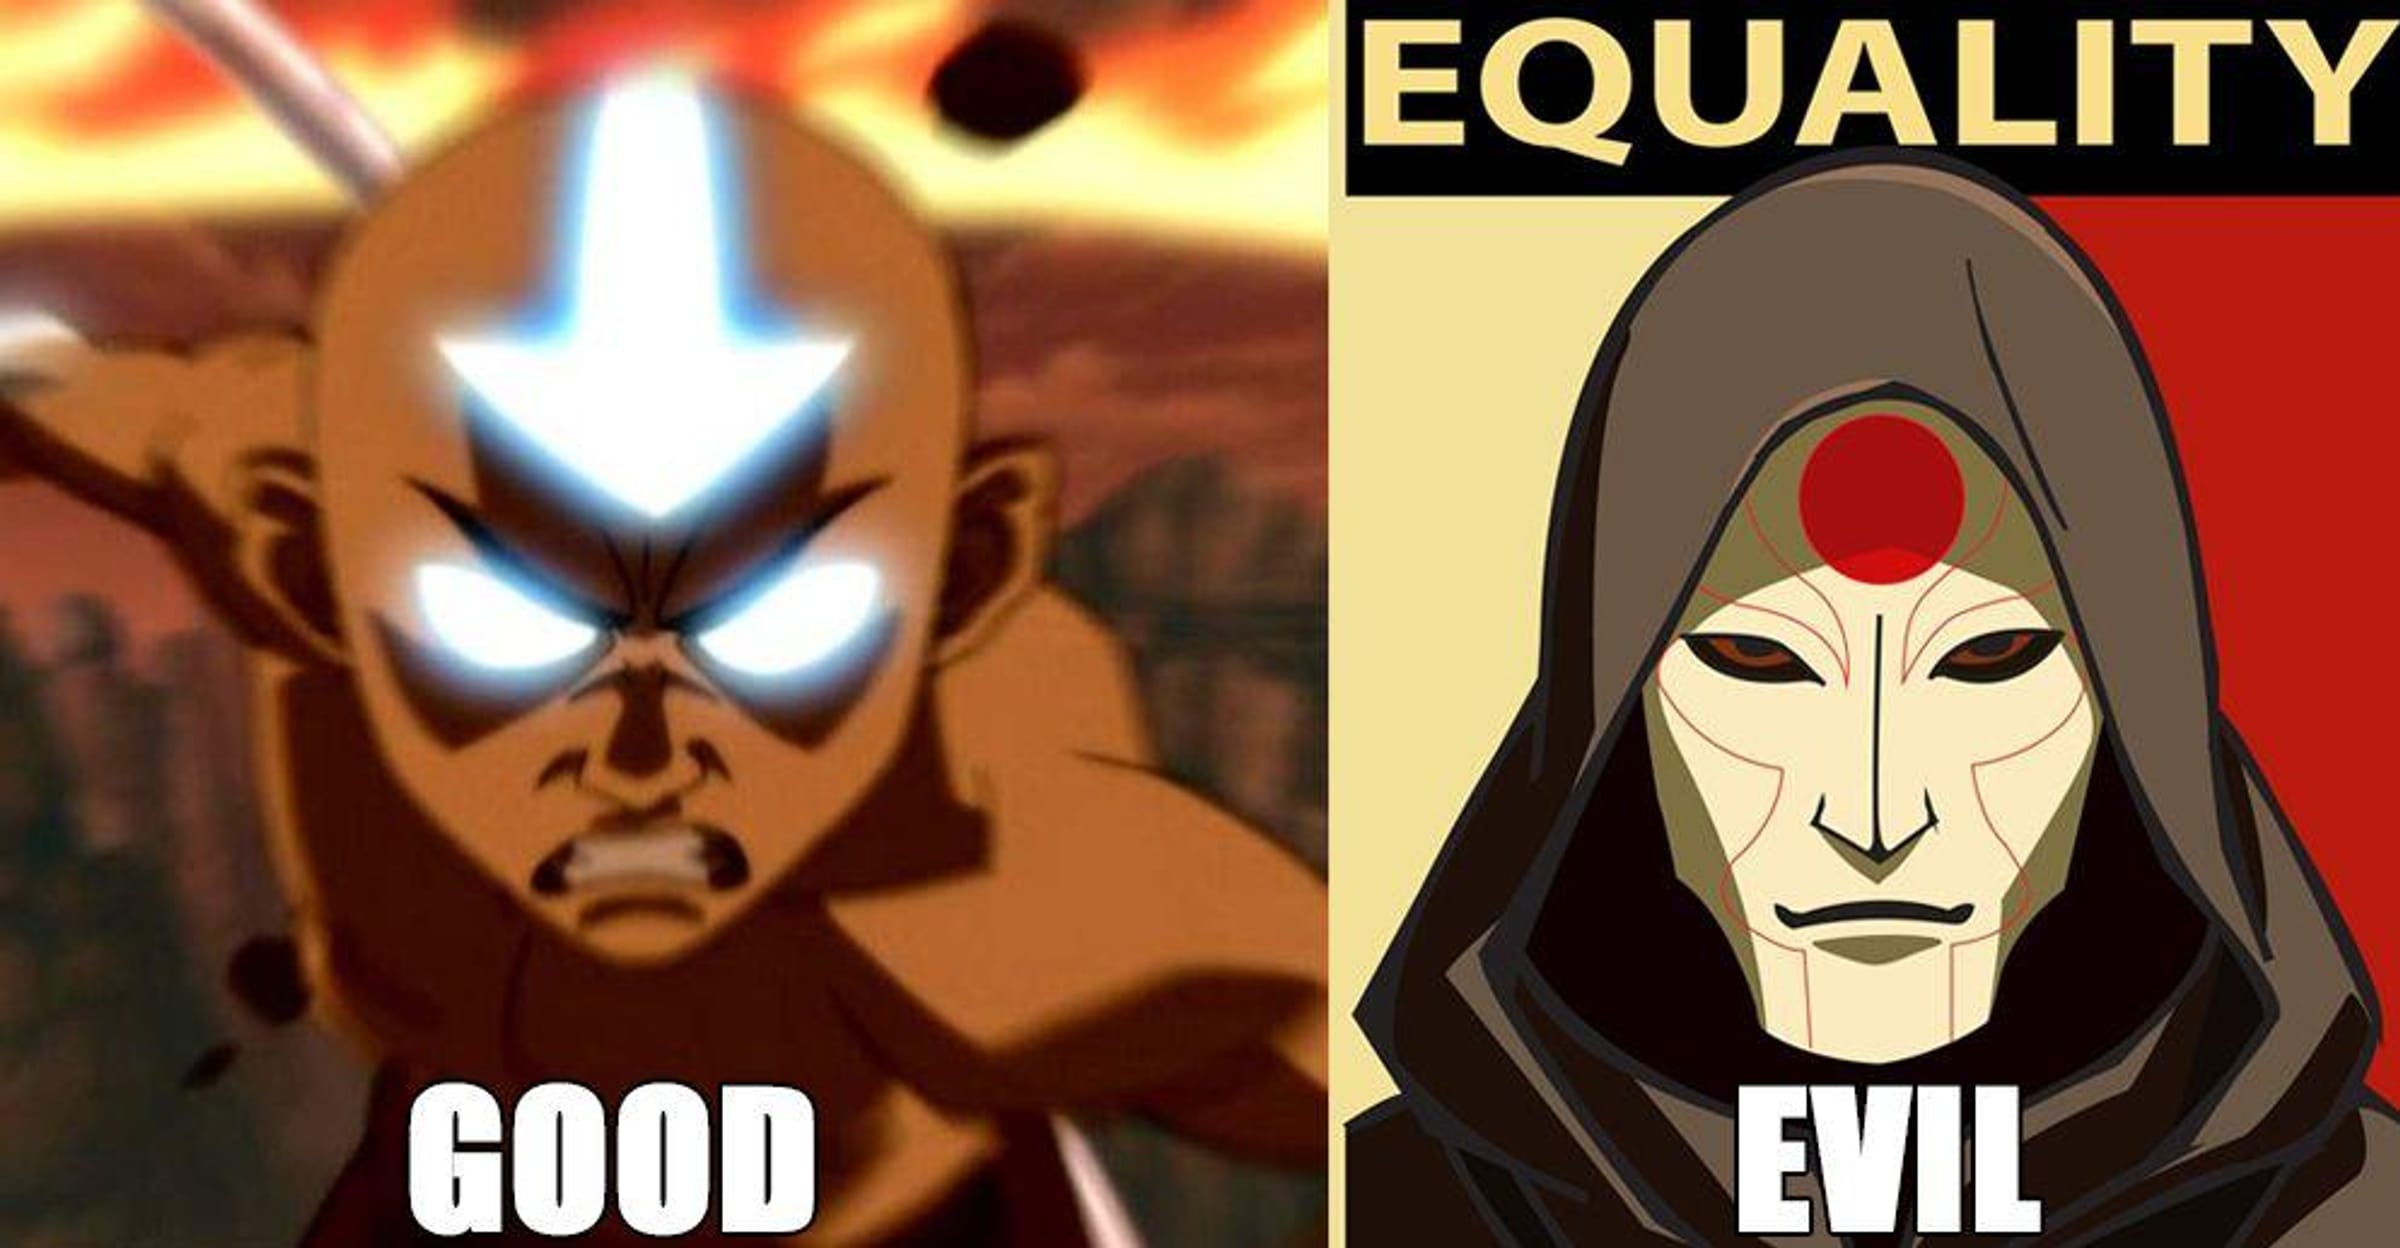 Some Anime influences in Avatar : r/TheLastAirbender